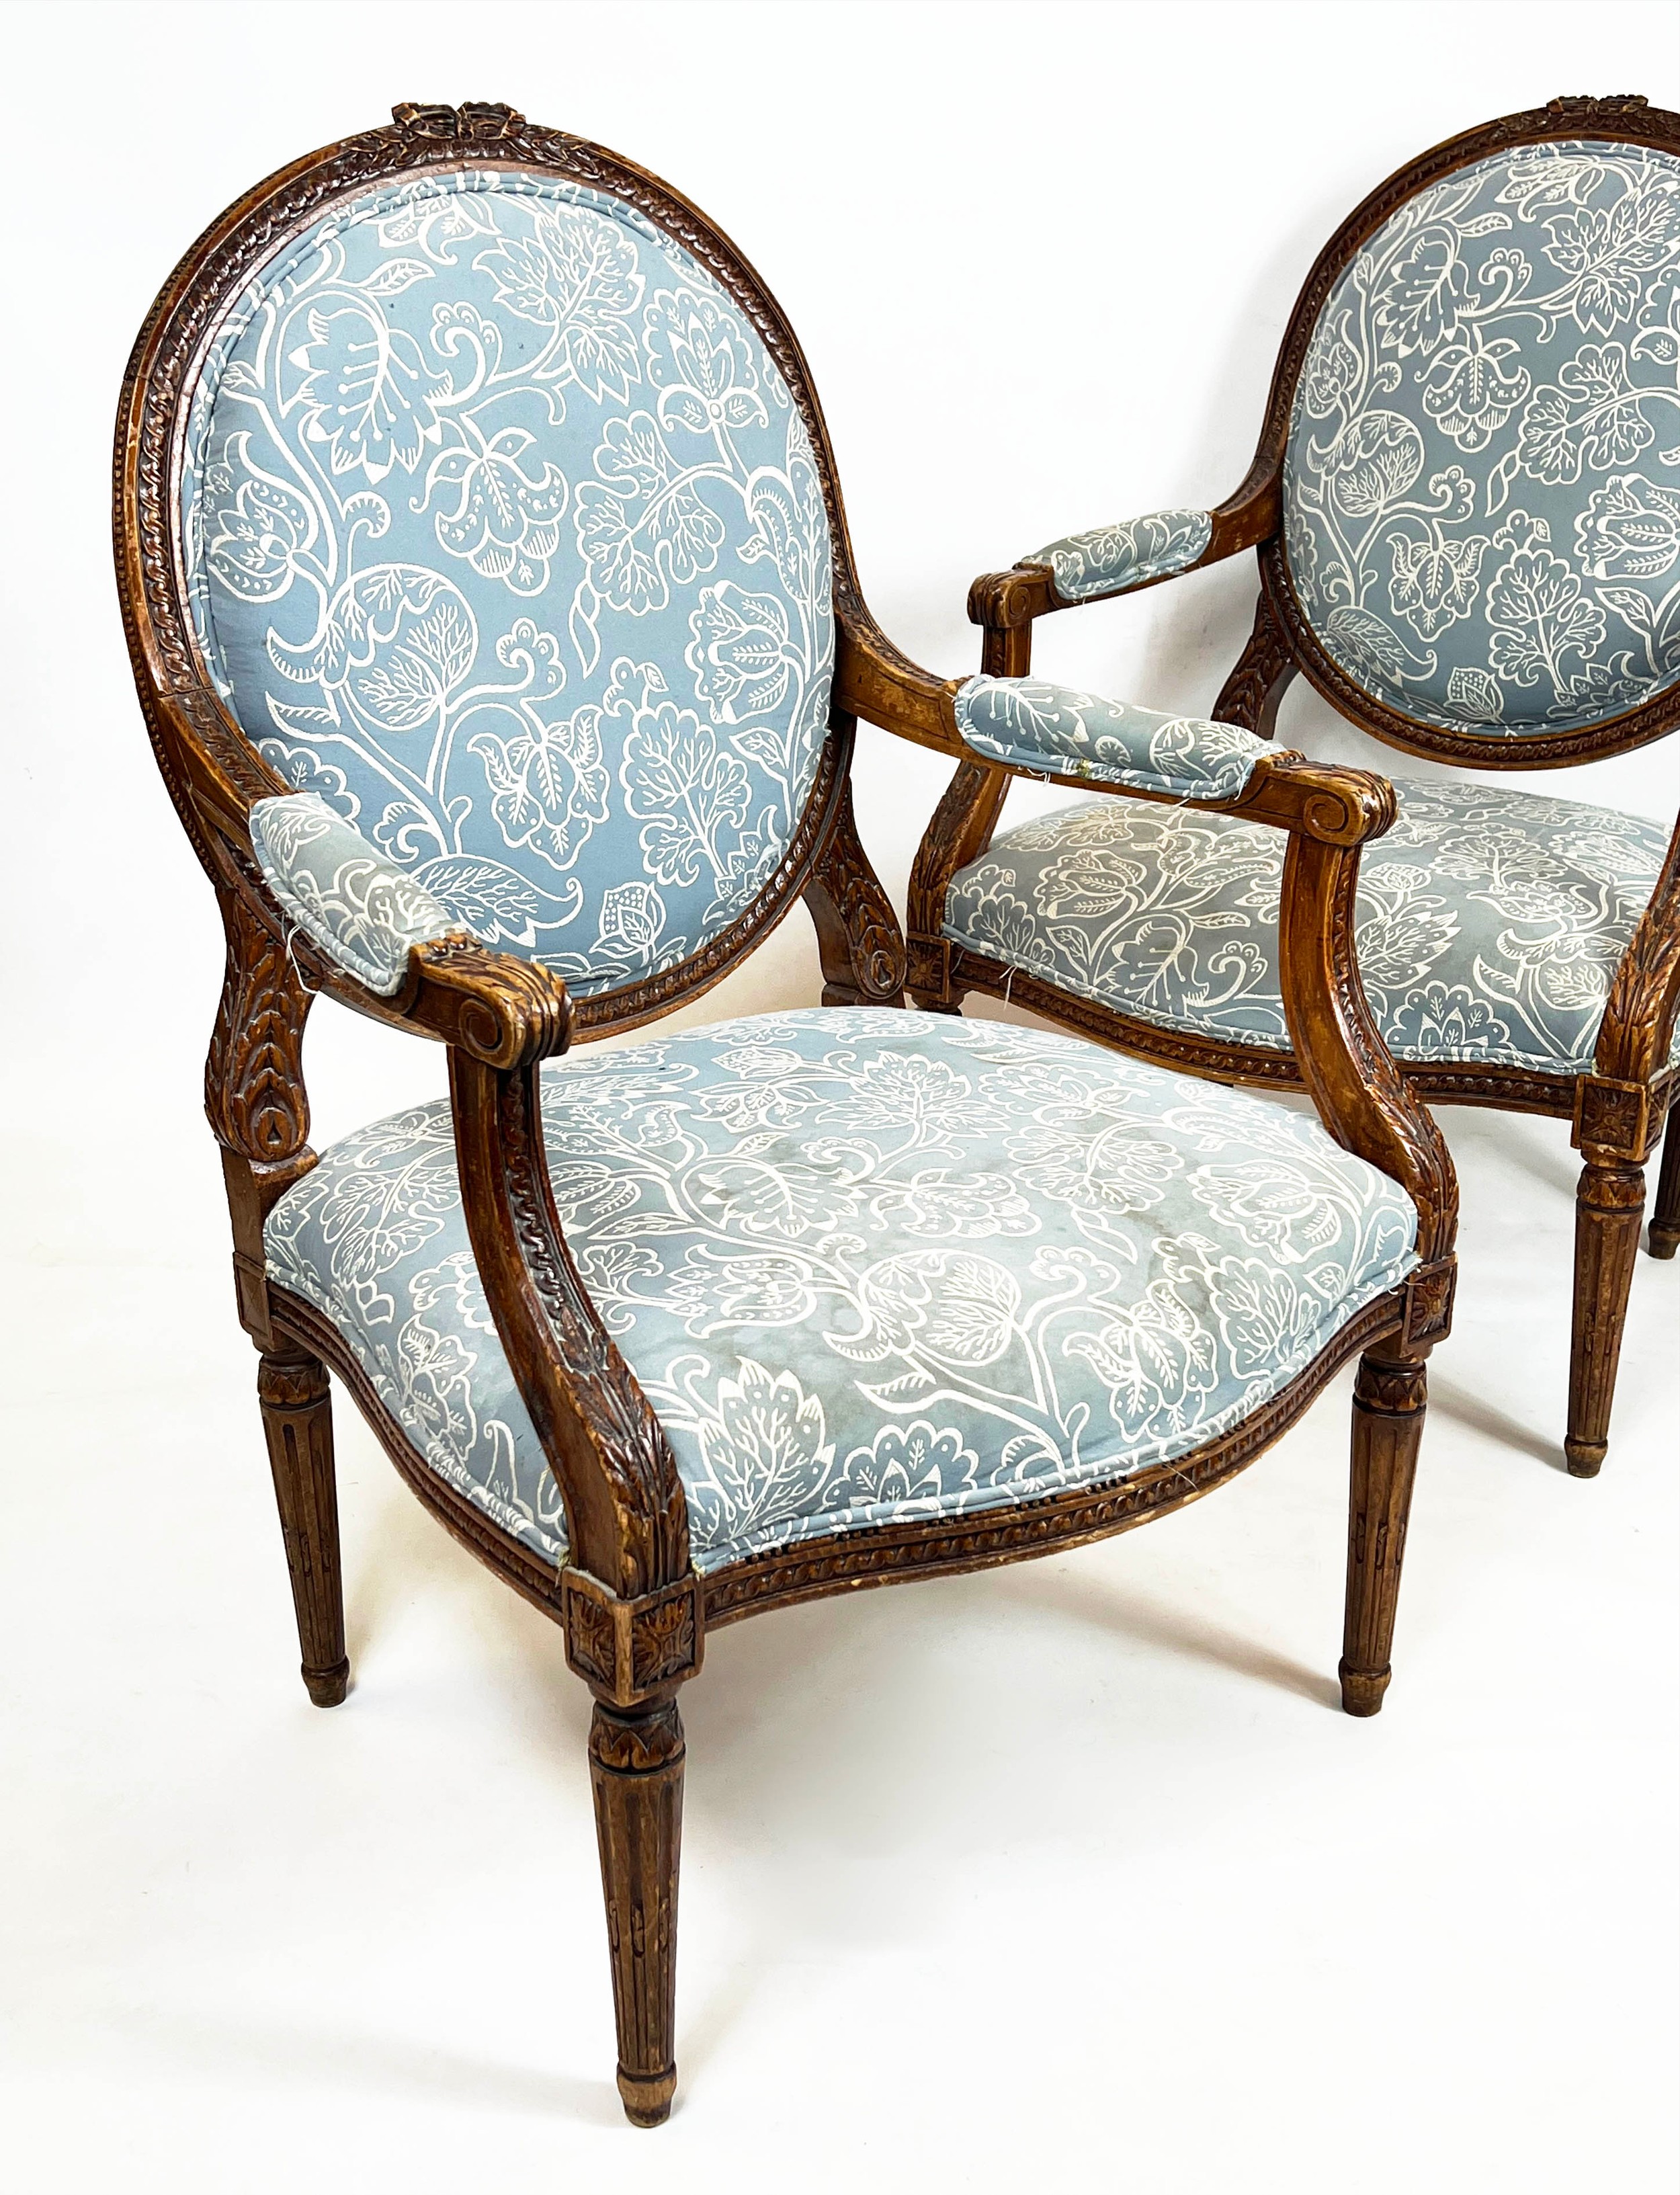 FAUTEUILS, 103cm H x 66cm, a pair, late 19th/early 20th century French beechwood in patterned blue - Image 2 of 4